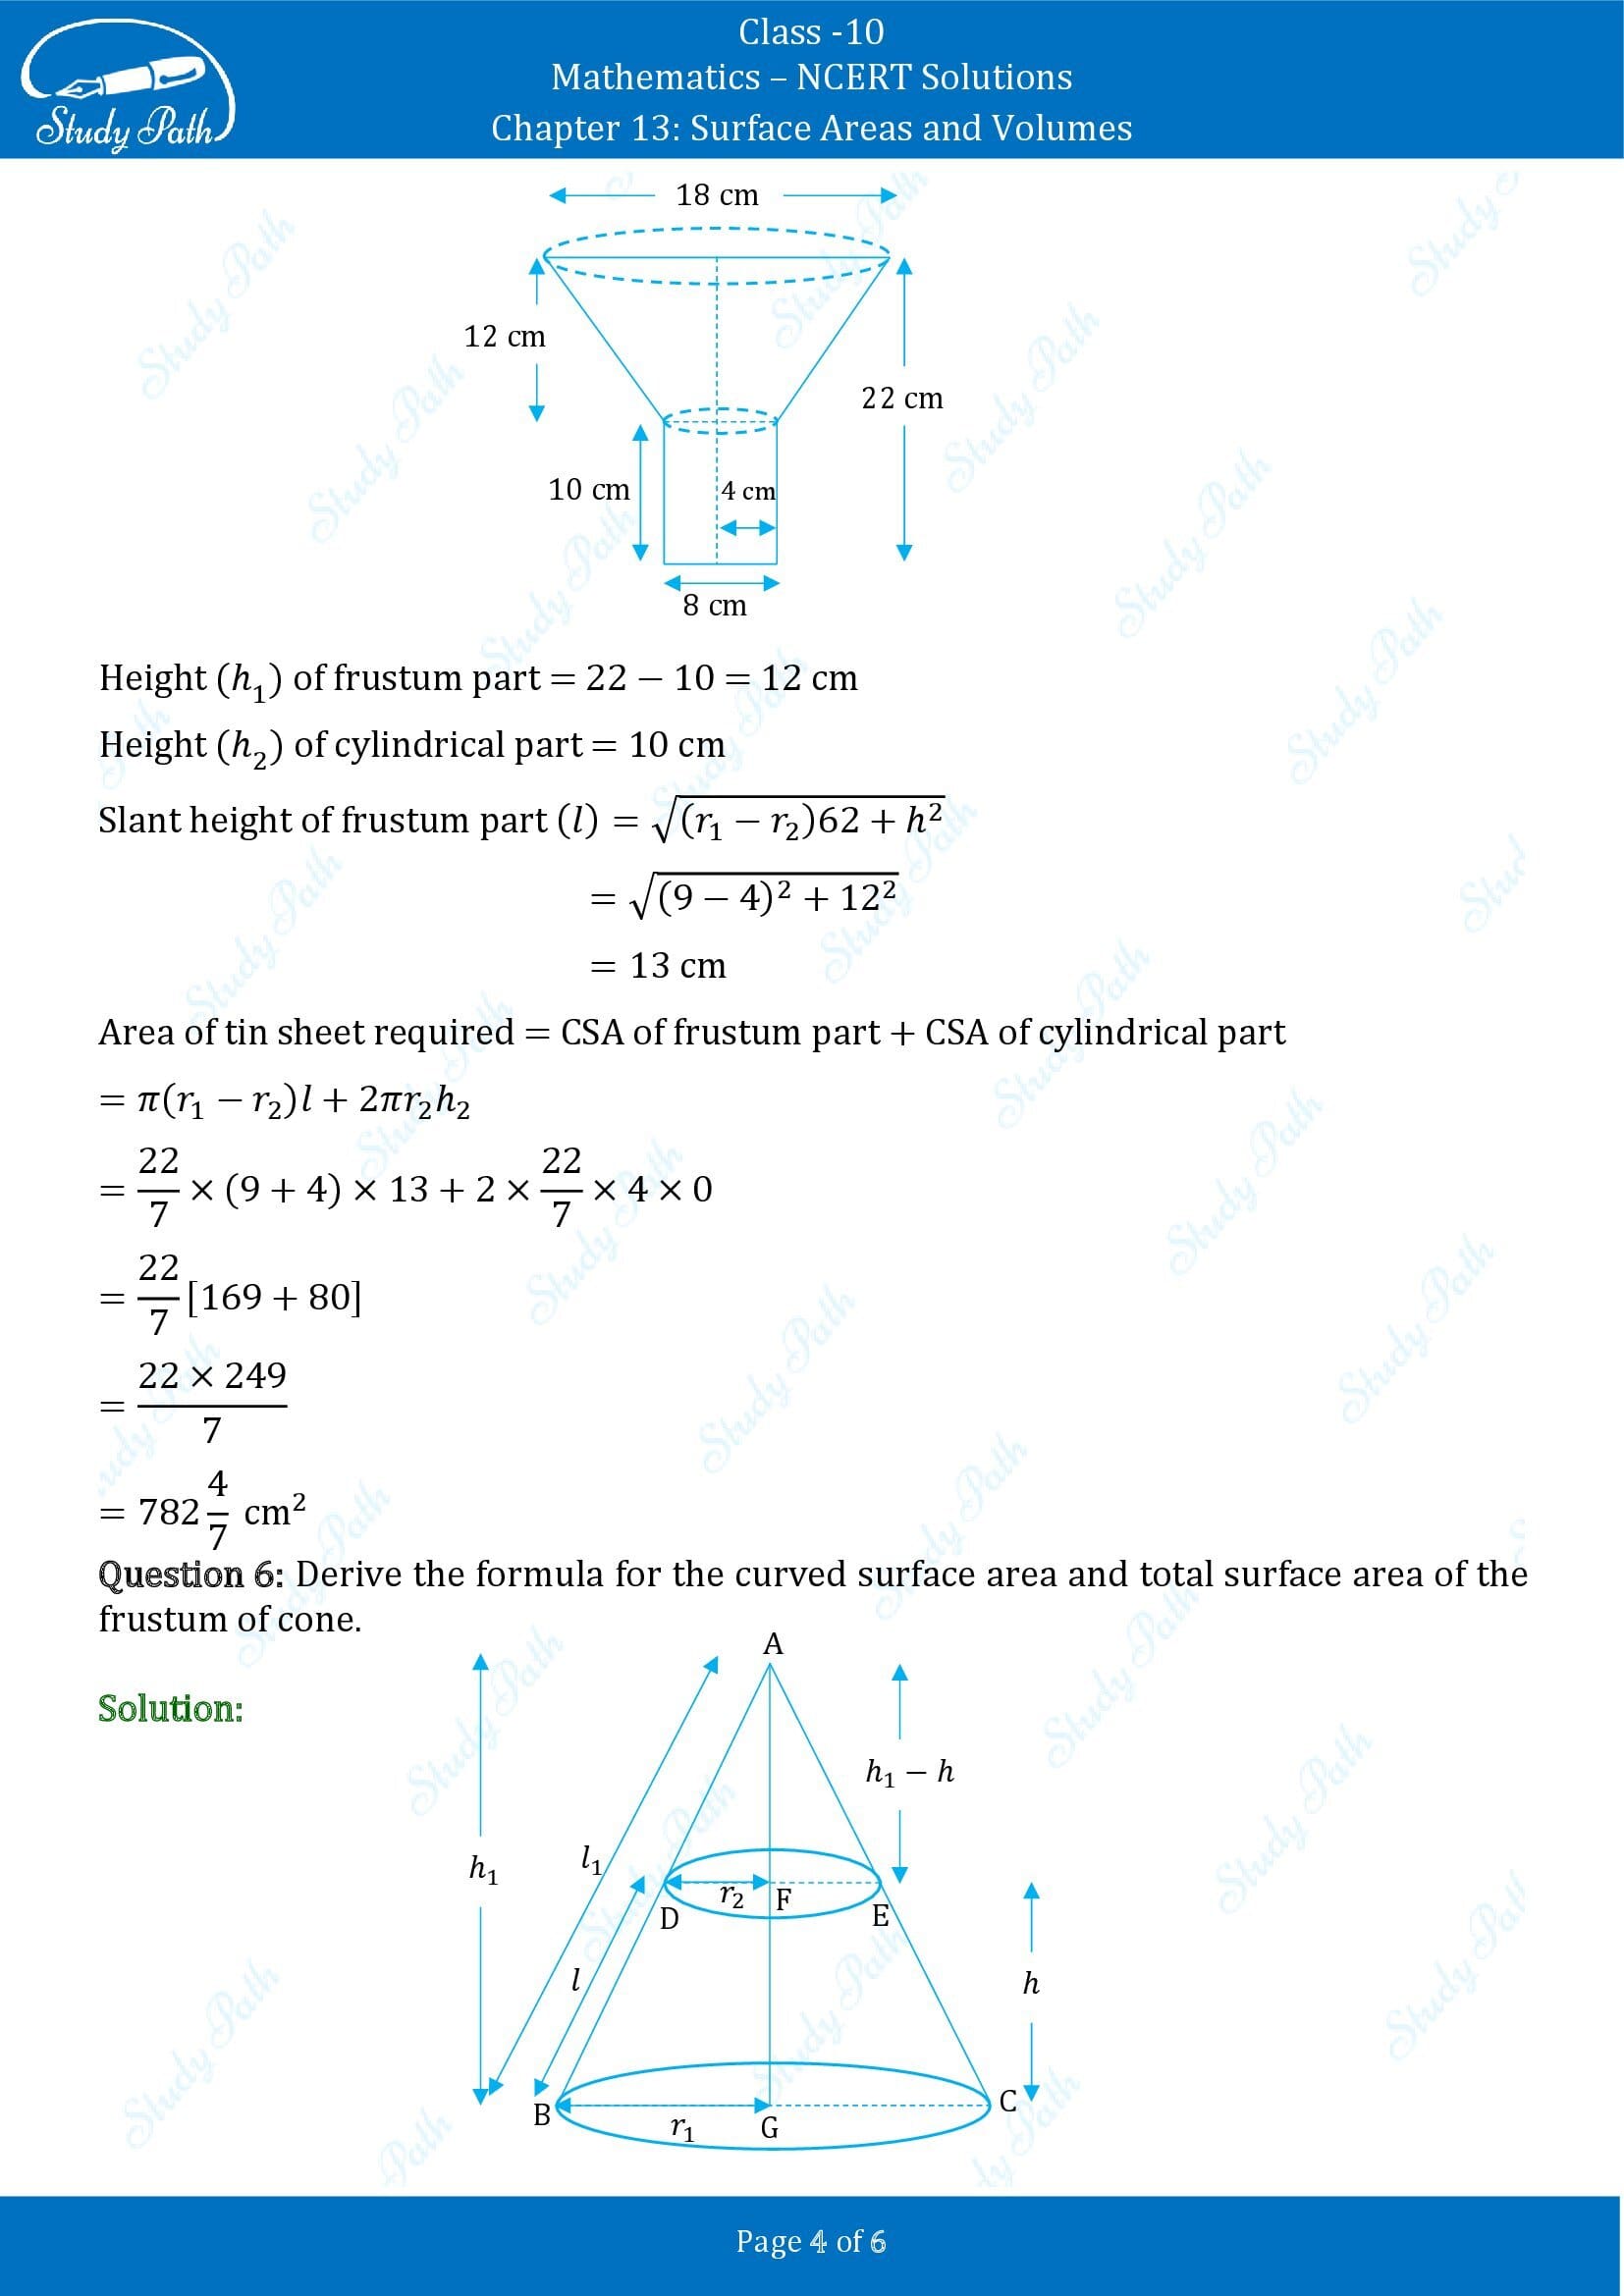 NCERT Solutions for Class 10 Maths Chapter 13 Surface Areas and Volumes Exercise 13.5 00004